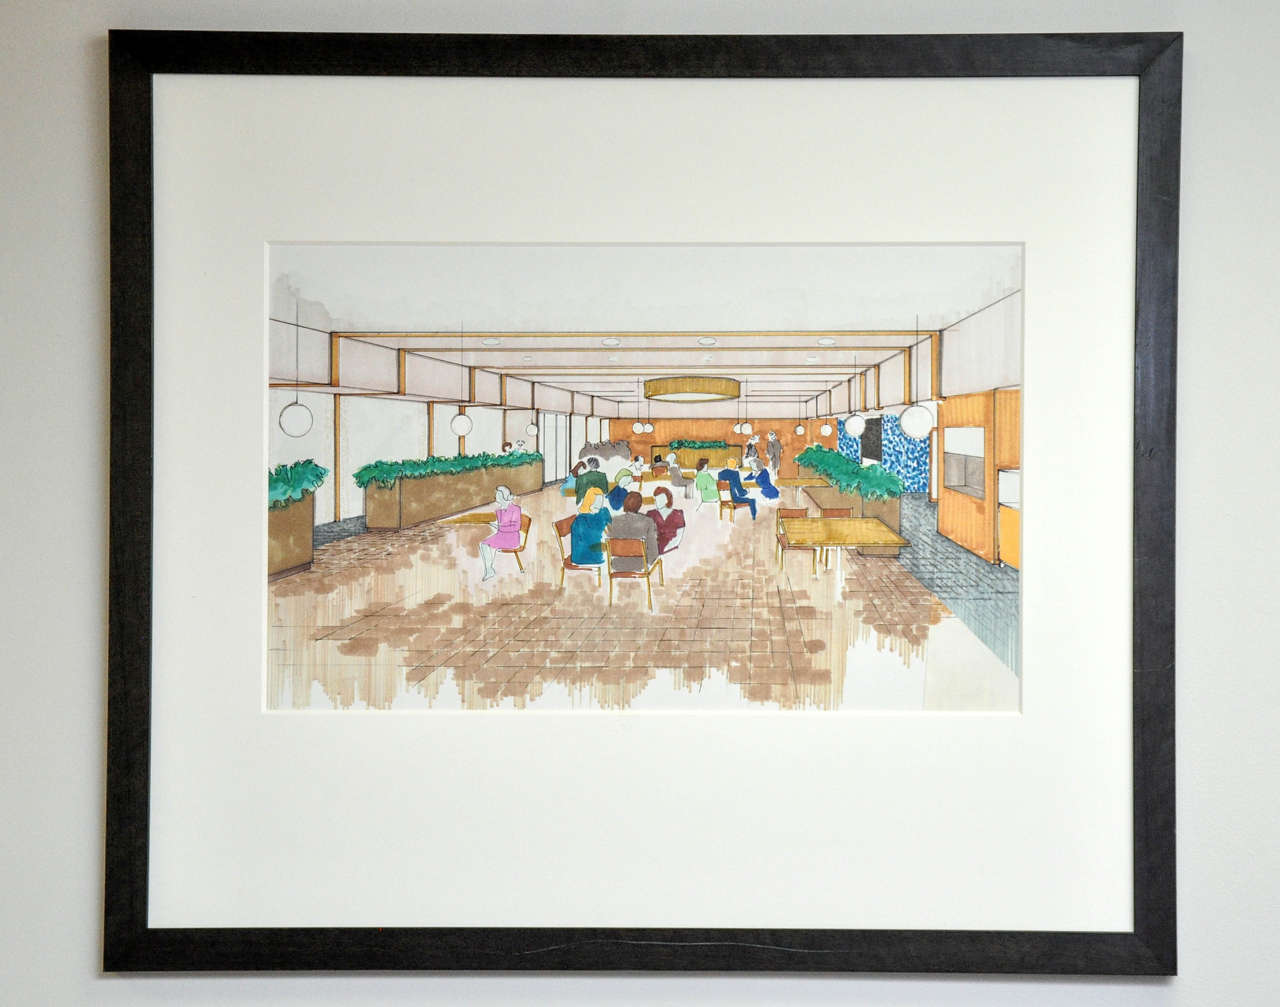 Nicely detailed rendering that has been water colored by the artist. Scene depicts groups of people meeting in a lobby. Newly framed and matted. Unsigned.